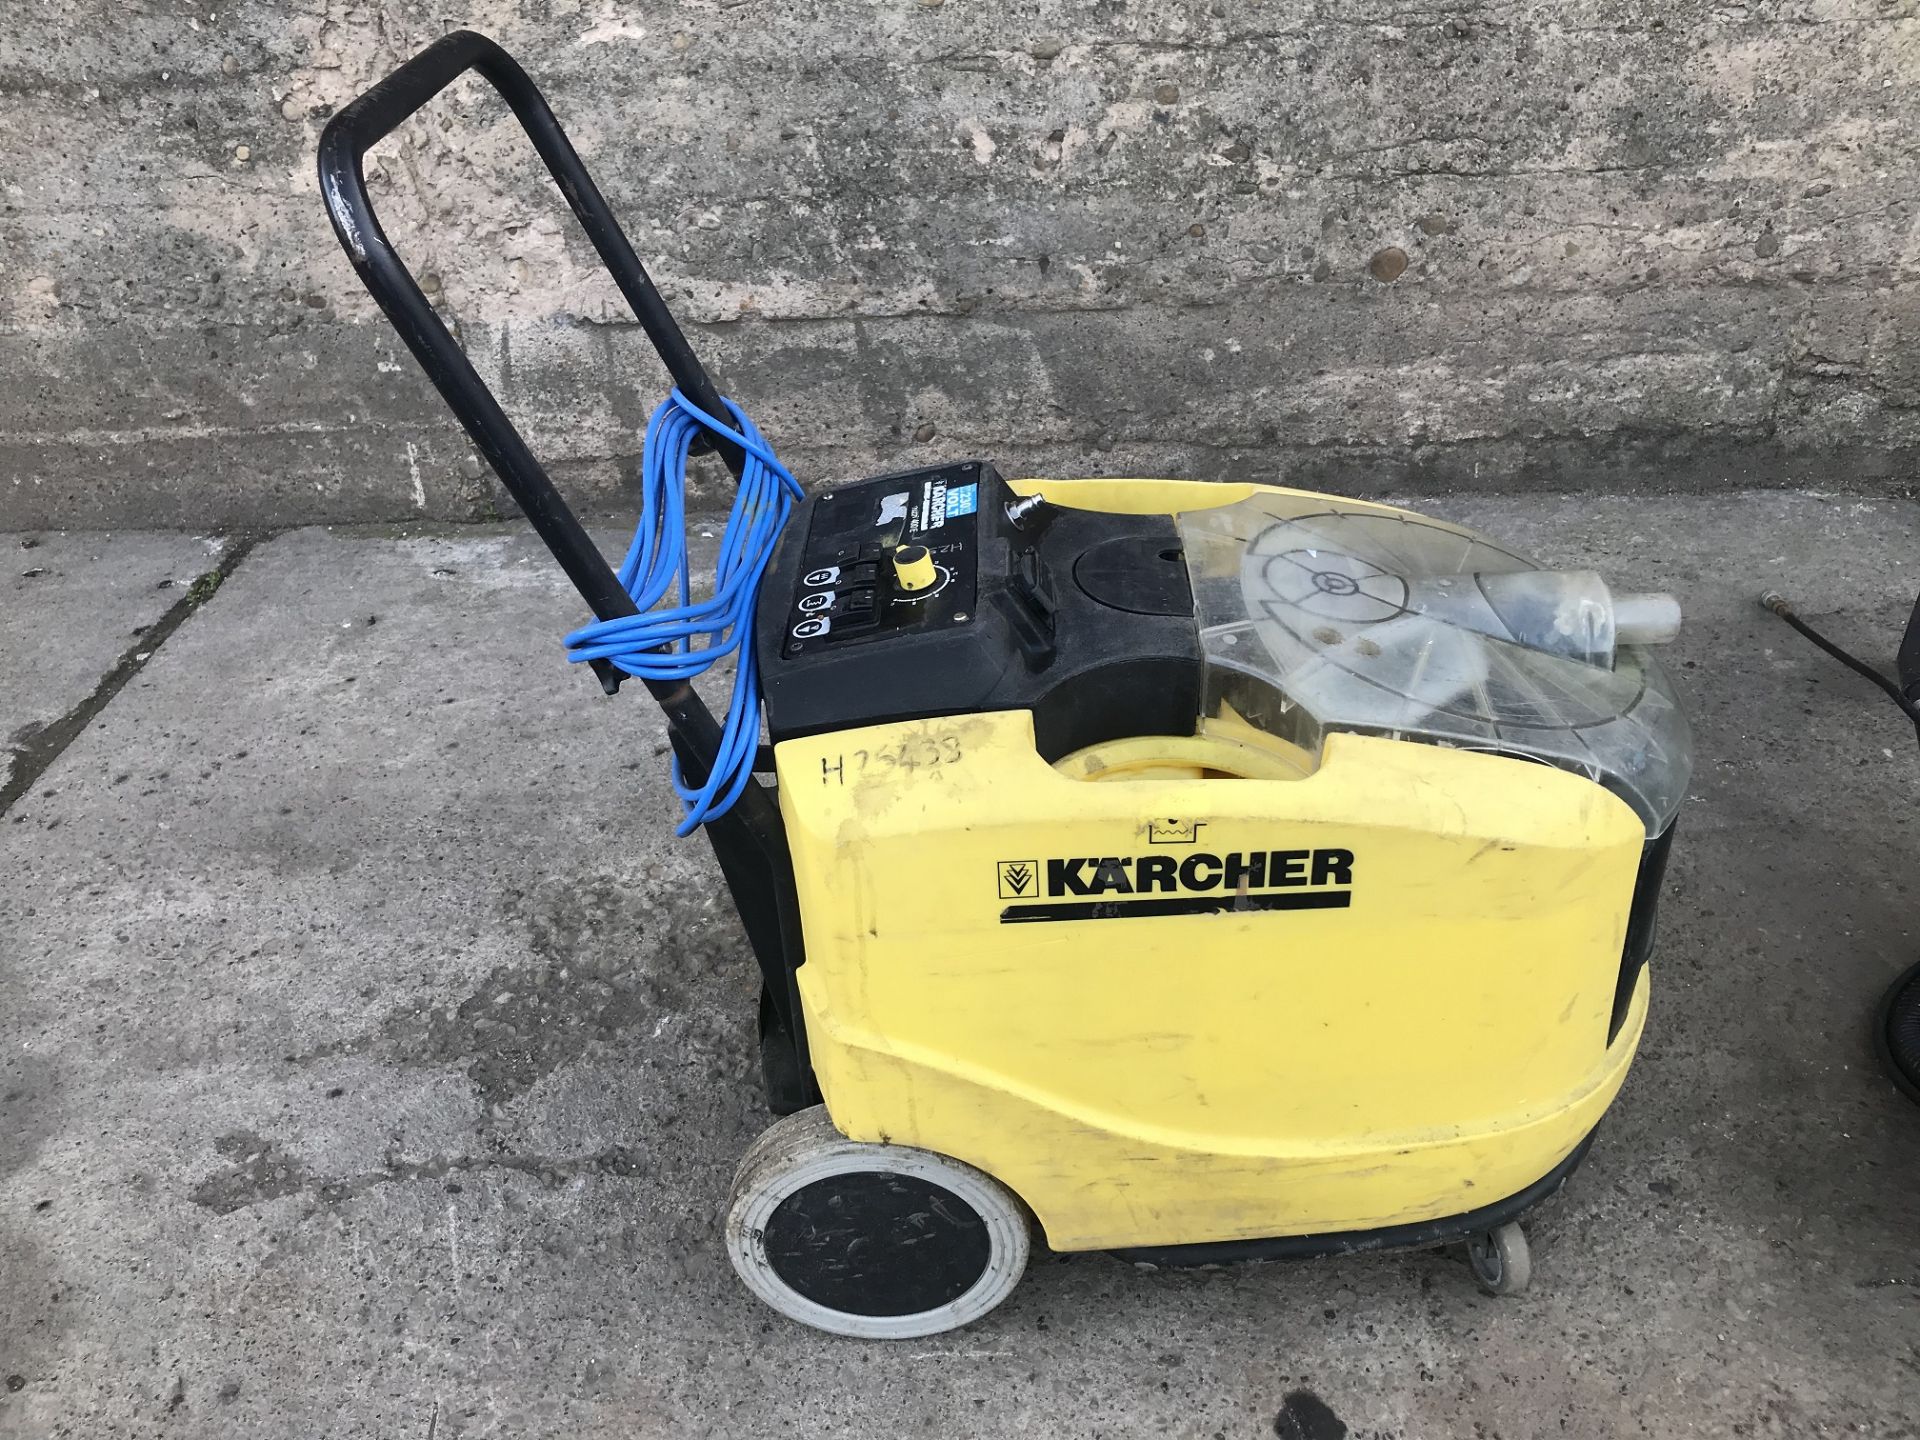 KARCHER PUZZI 400E 240V HOT & COLD CARPET CLEANER C/W HEAVY DUTY CLEANING ATTACHMENTS *PLUS VAT* - Image 3 of 6